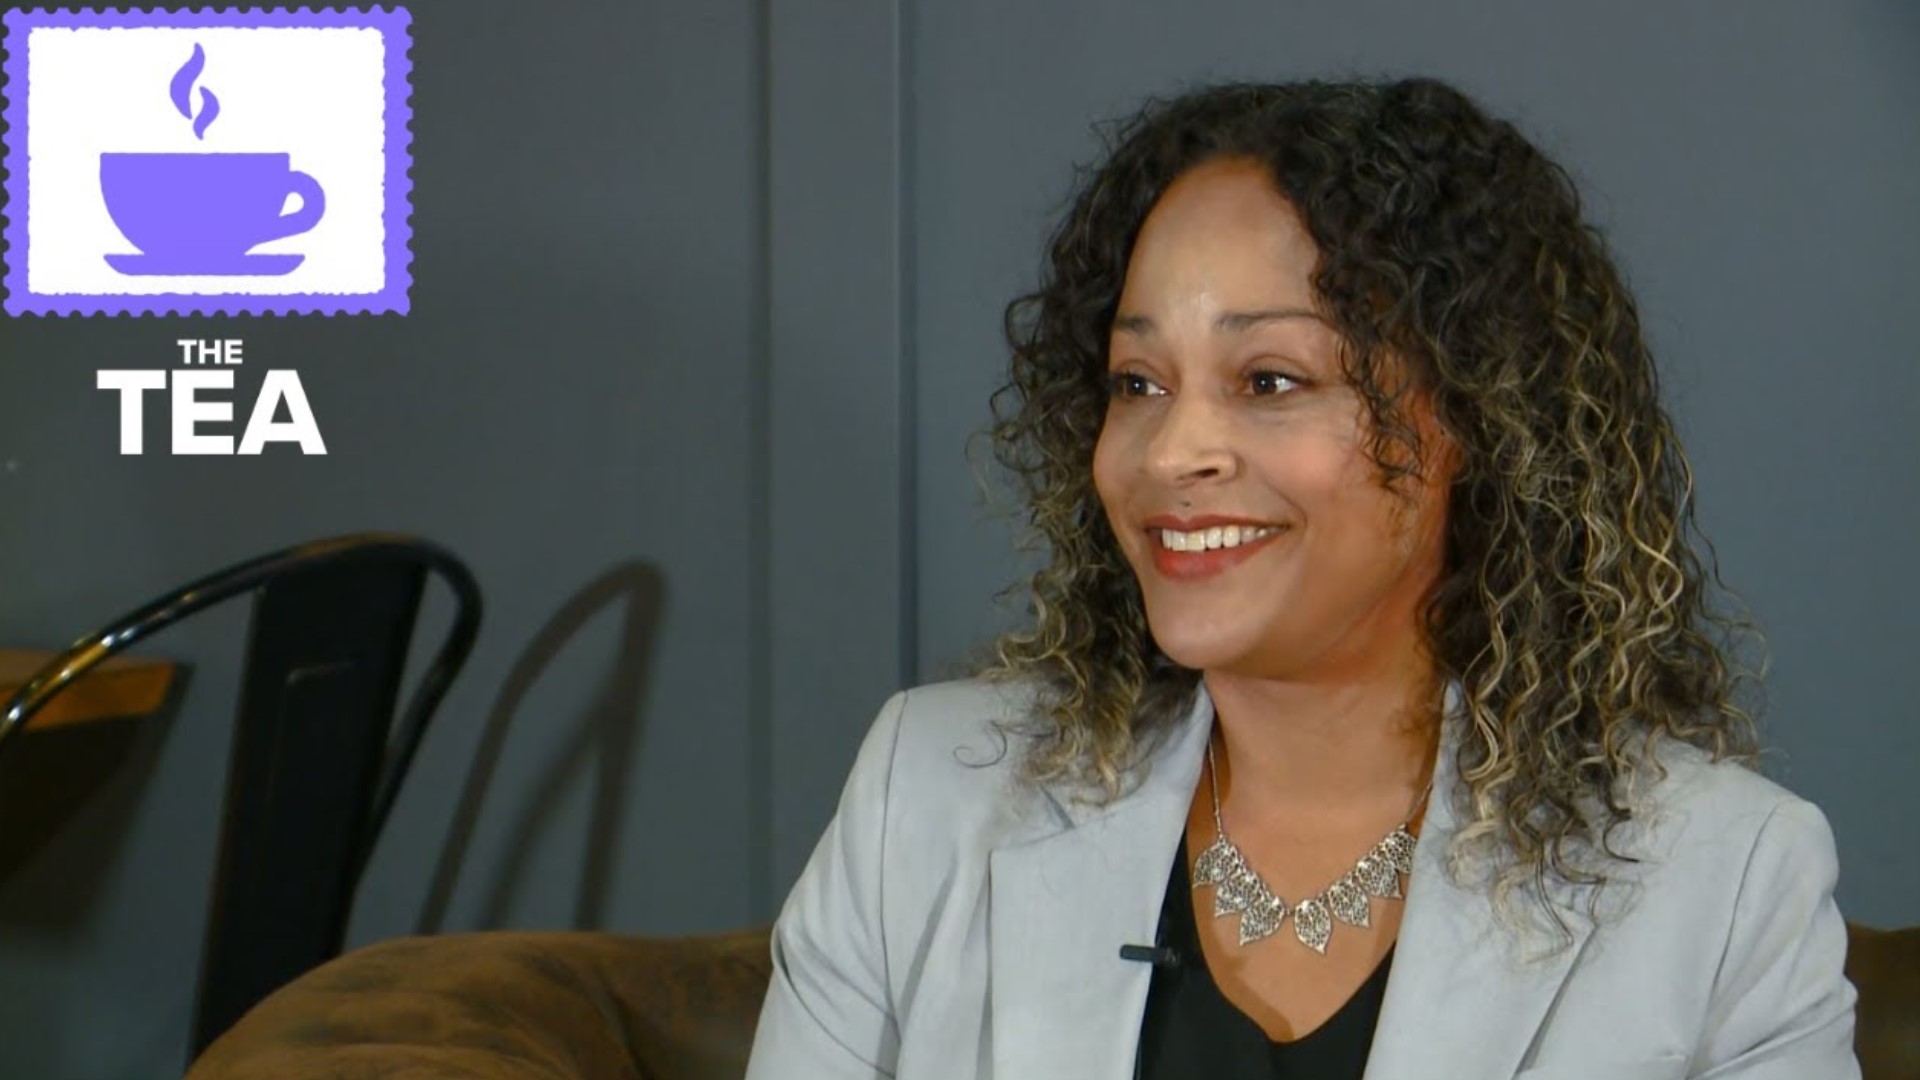 Natasha Hill is running for US Representative for Washington state. We spoke with her over tea about what she would bring to the position.